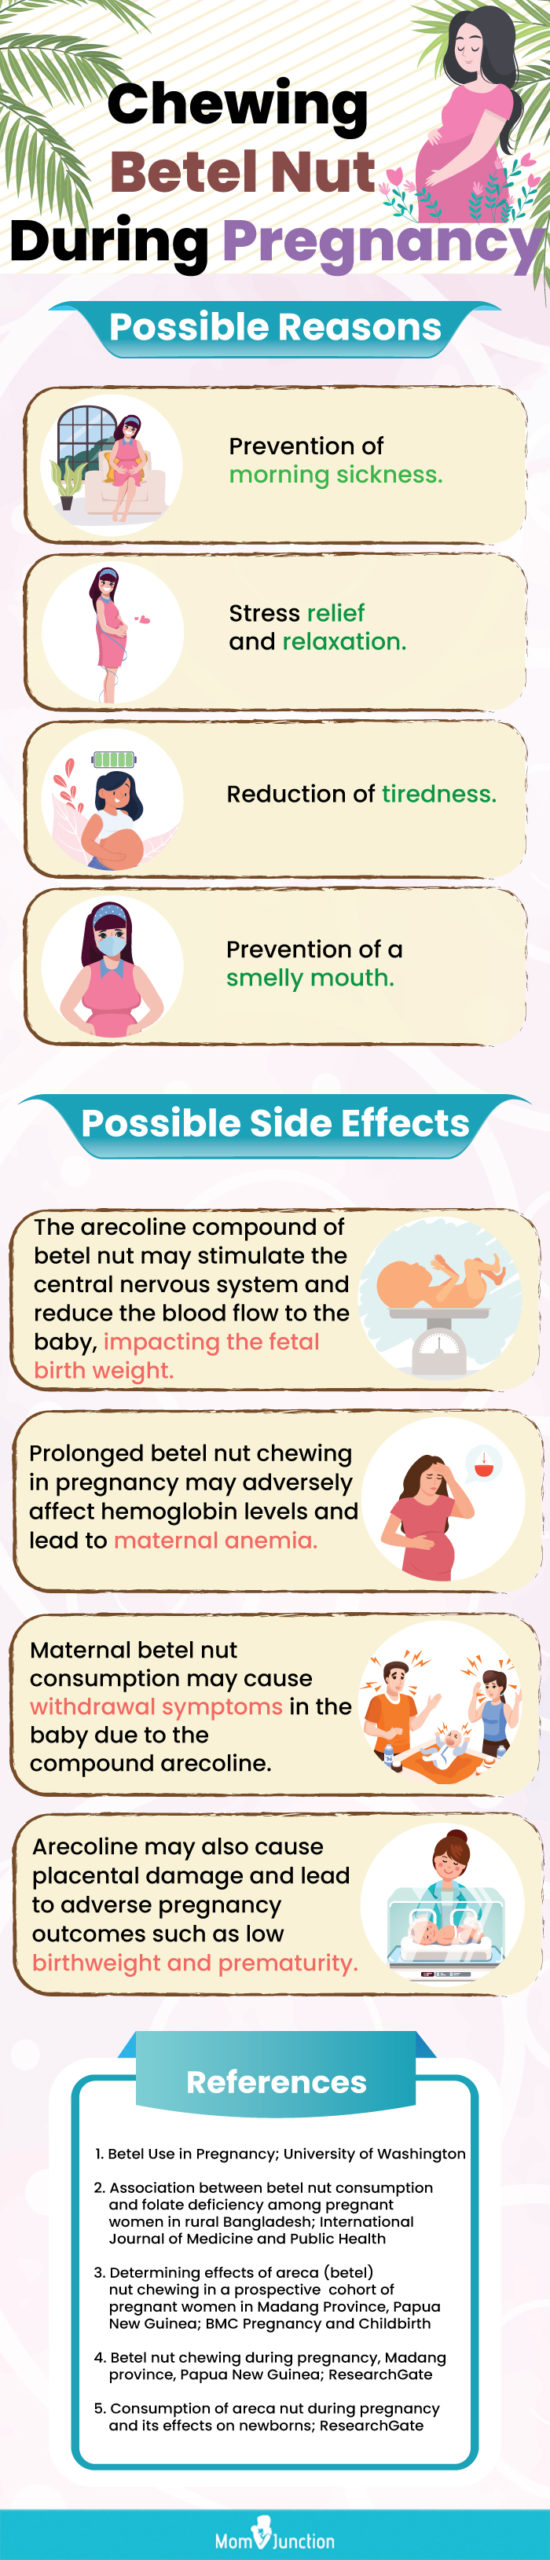 chewing betel nut during pregnancy (infographic)